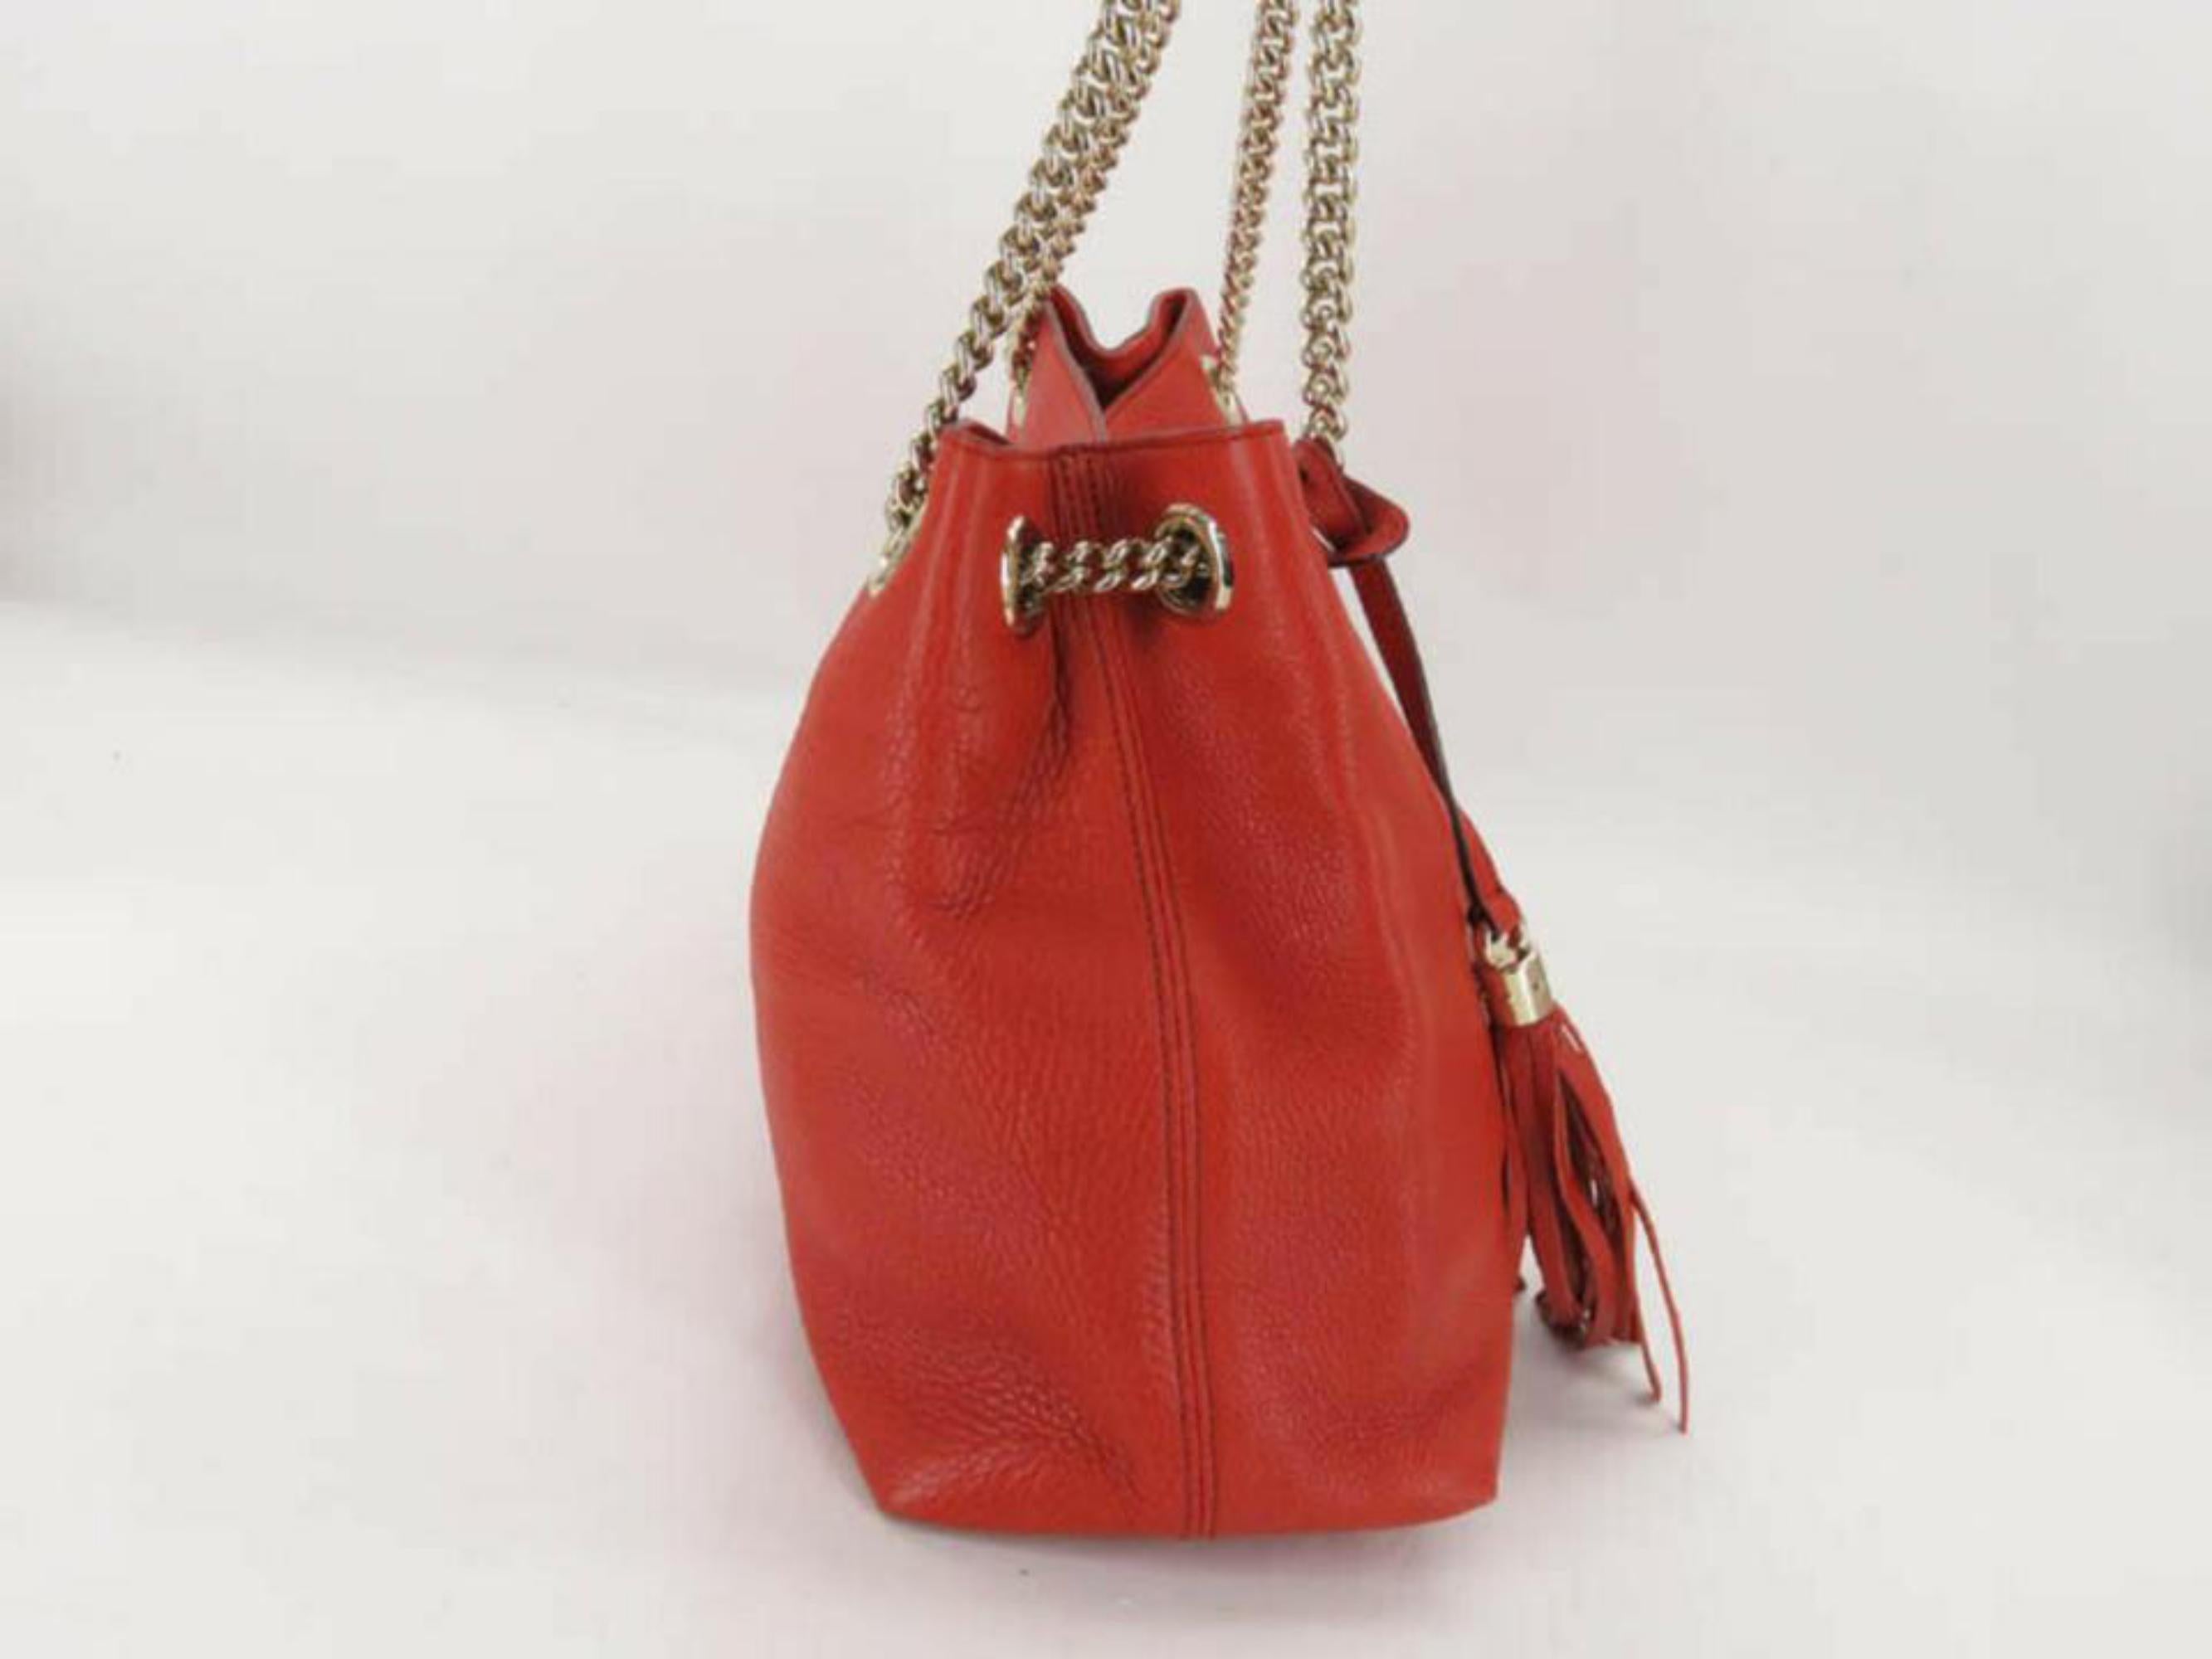 Gucci Soho Fringe Tassel Chain 870255 Red Leather Tote For Sale 6